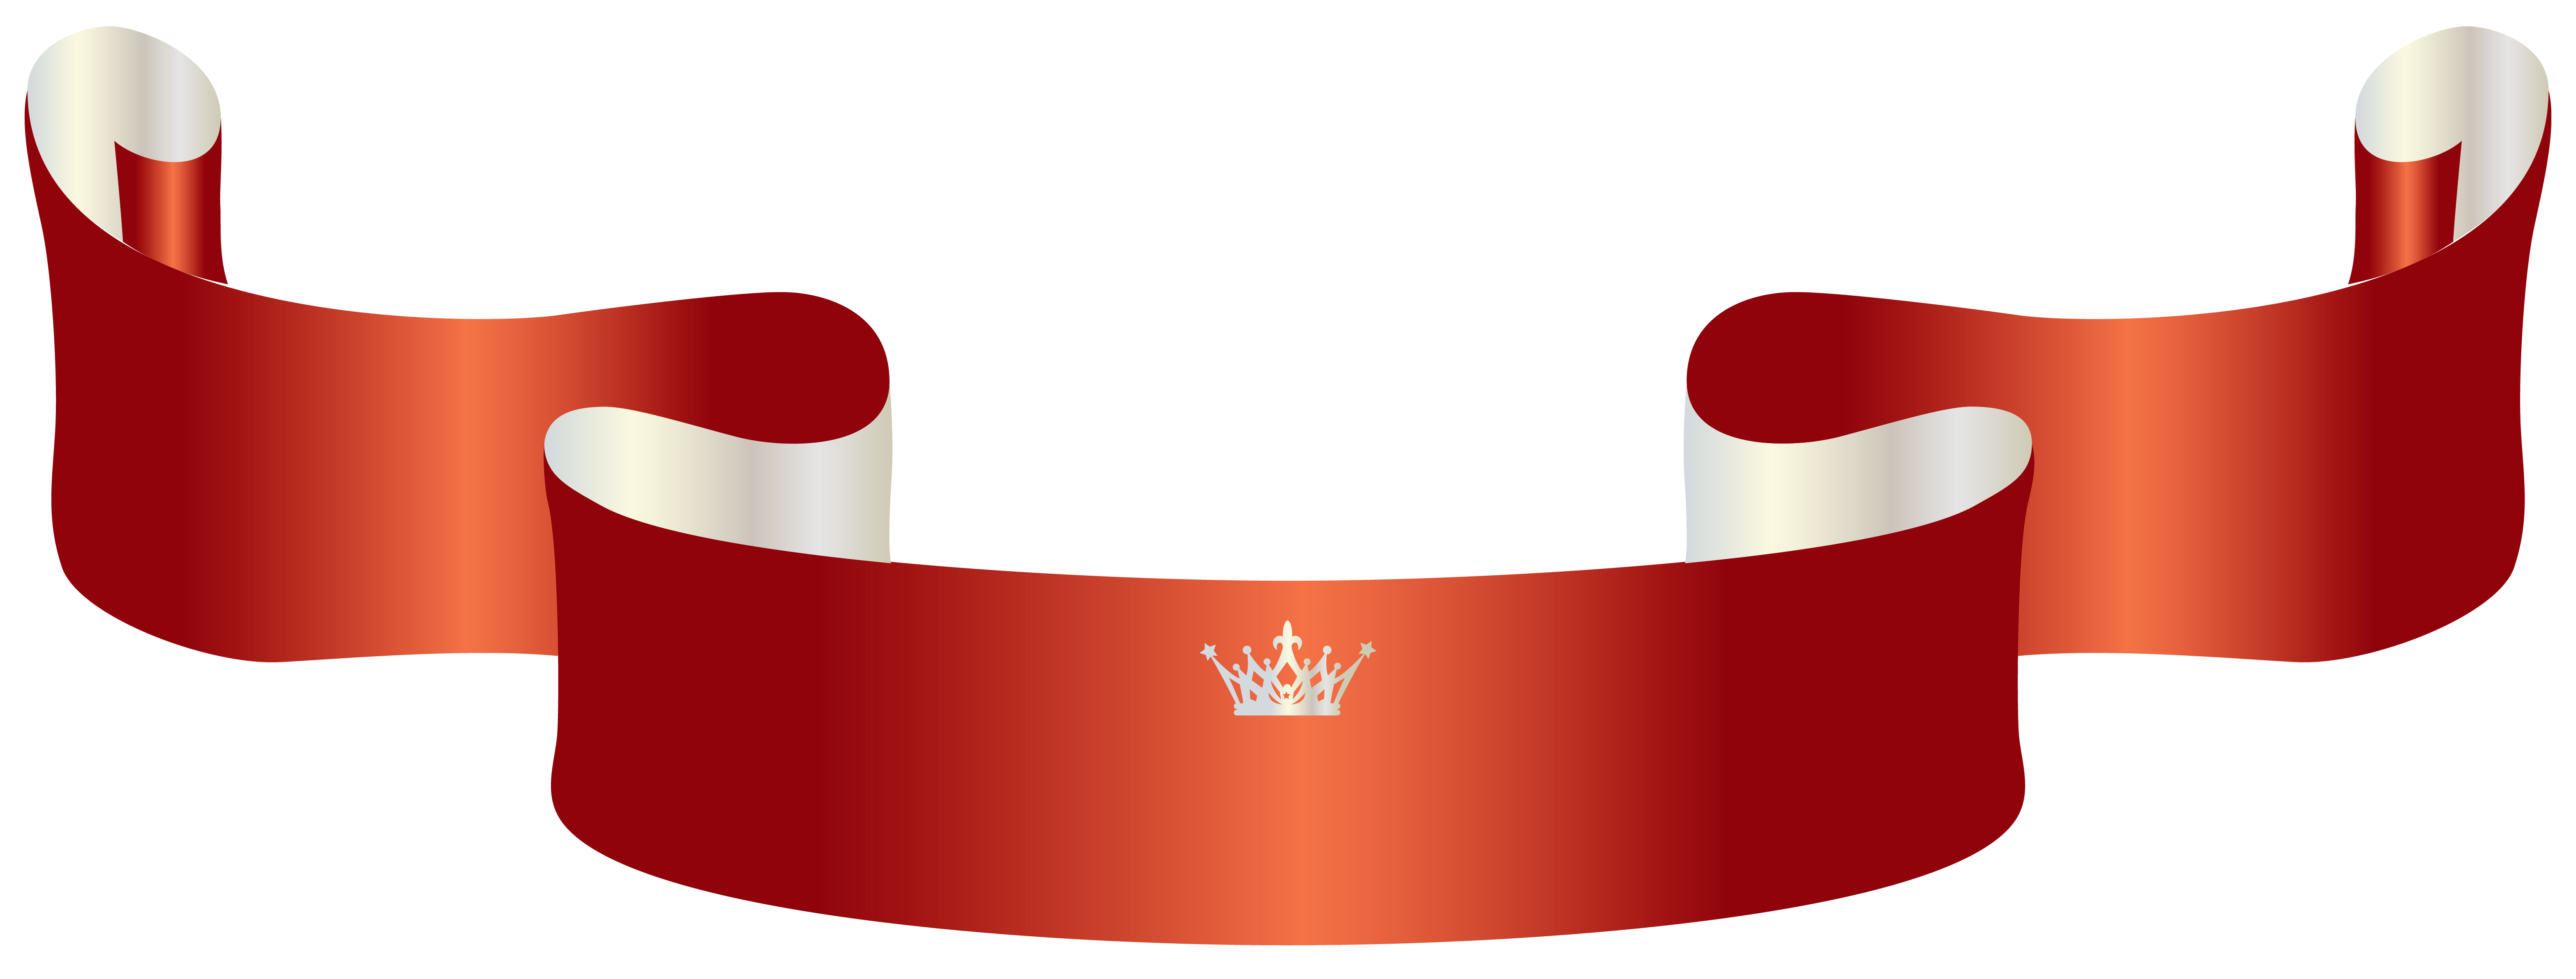 crown clipart christmas